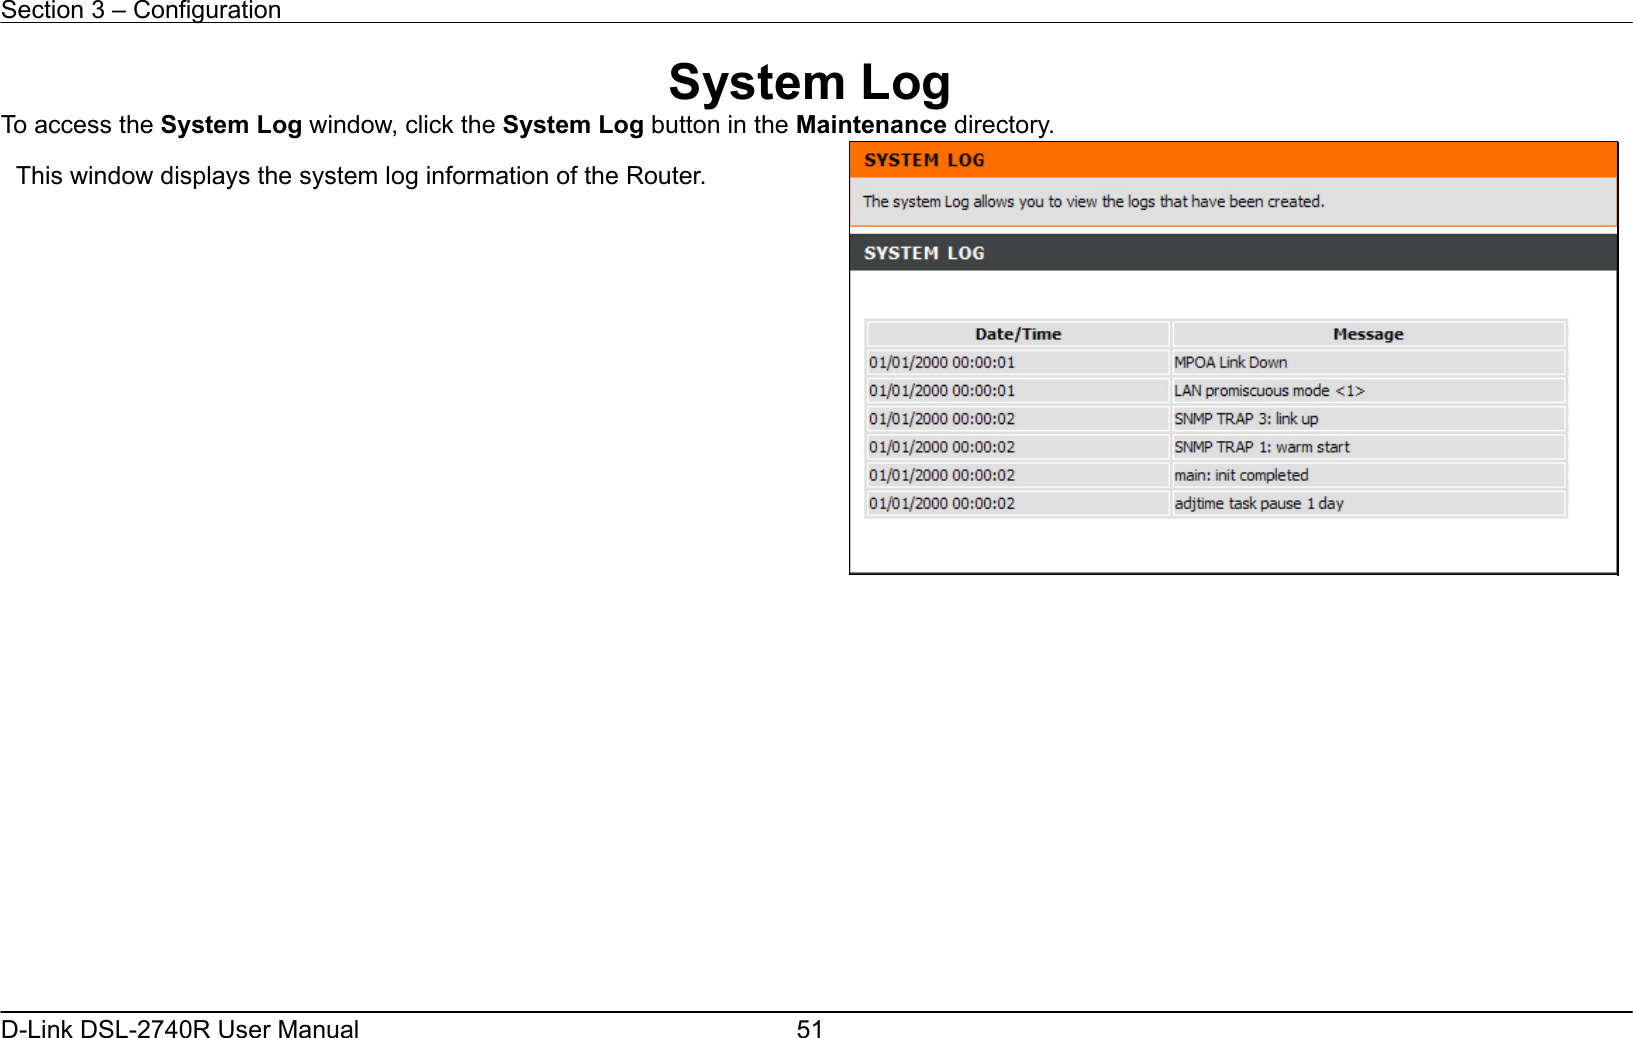 Section 3 – Configuration   D-Link DSL-2740R User Manual  51System Log To access the System Log window, click the System Log button in the Maintenance directory.               This window displays the system log information of the Router. 